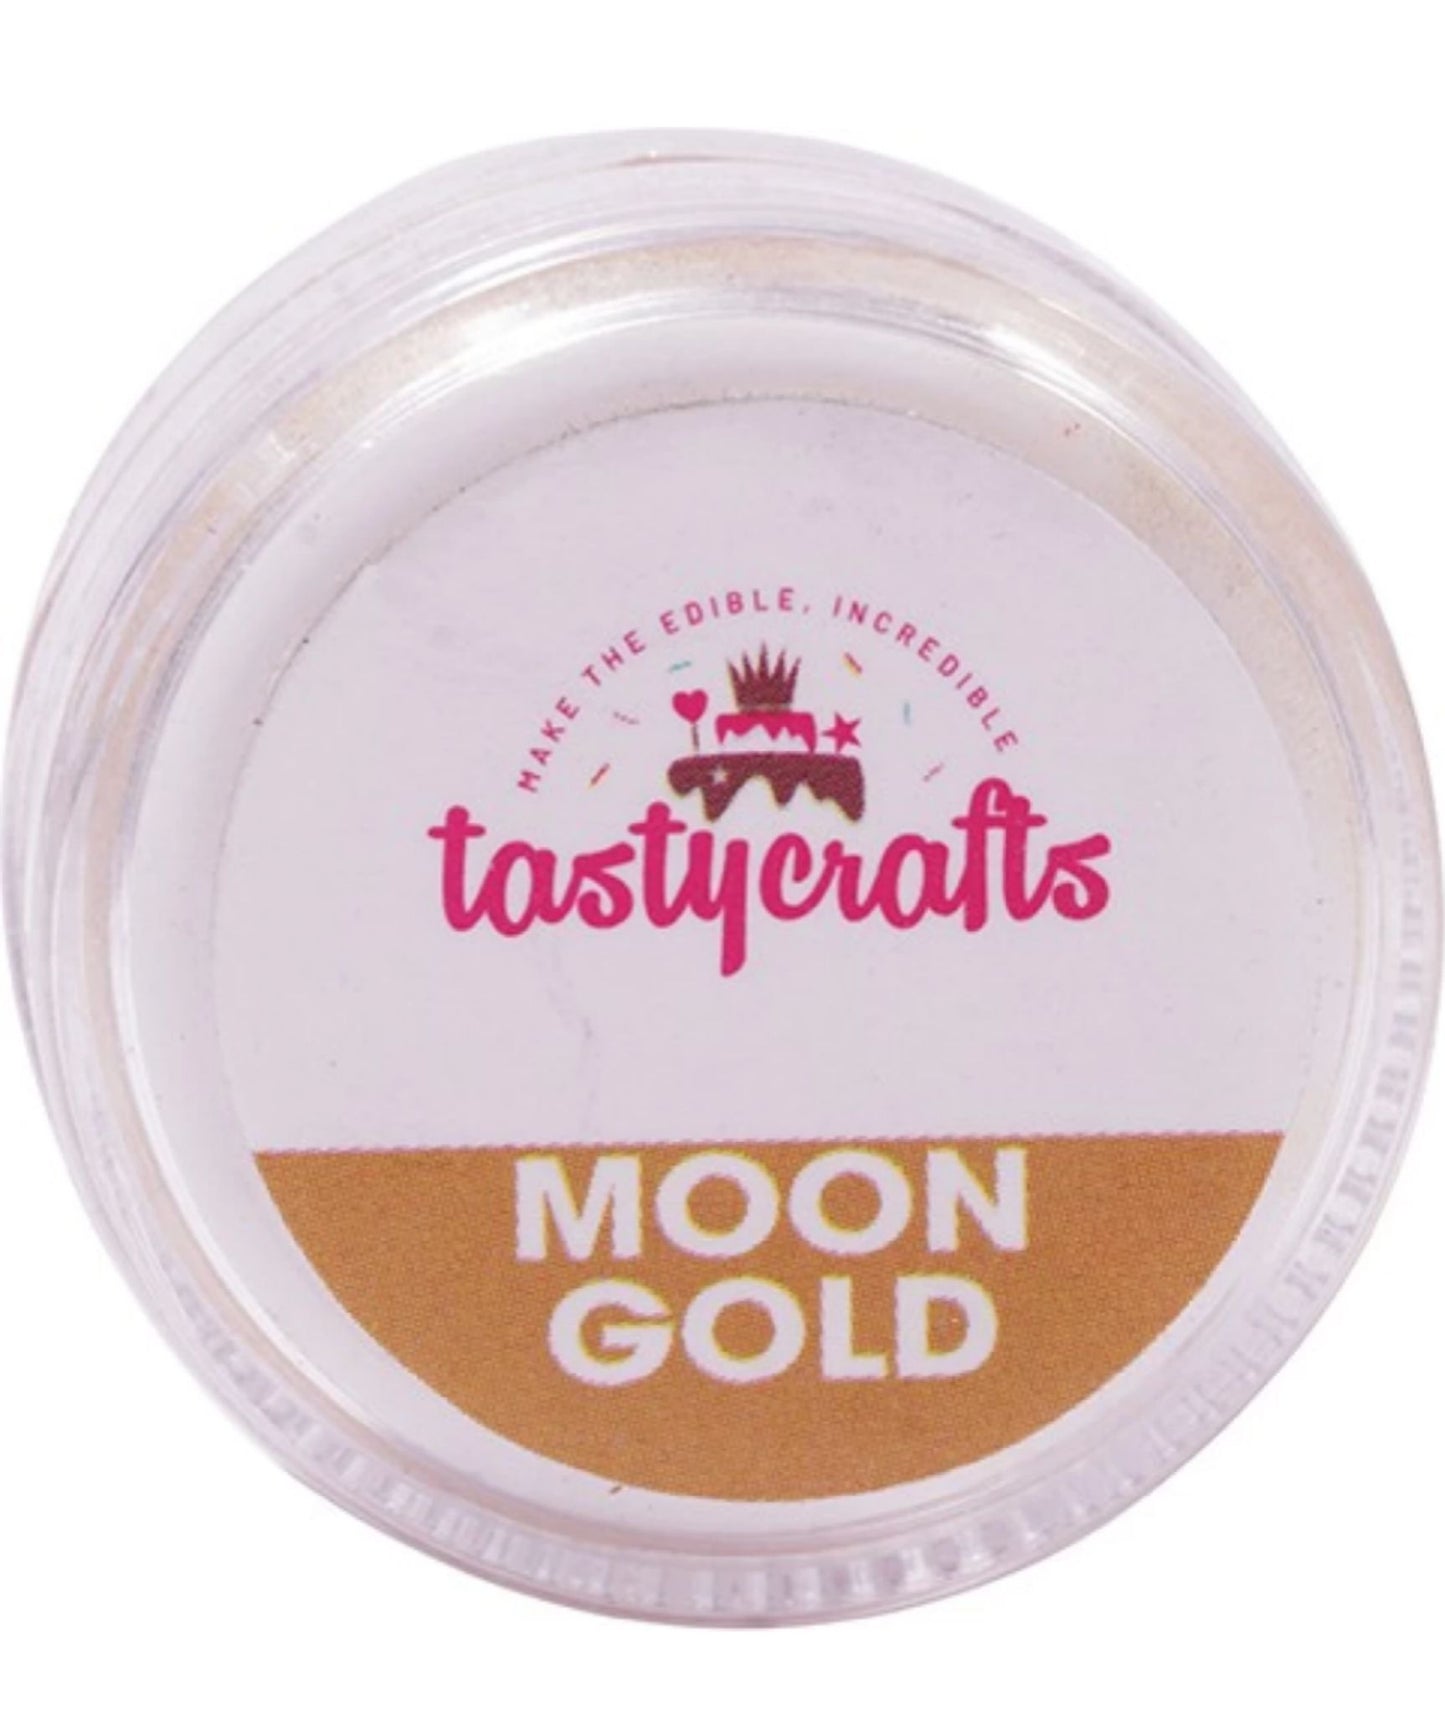 Tasty Crafts Moon Gold Luster Dust
Weight -4.5gm